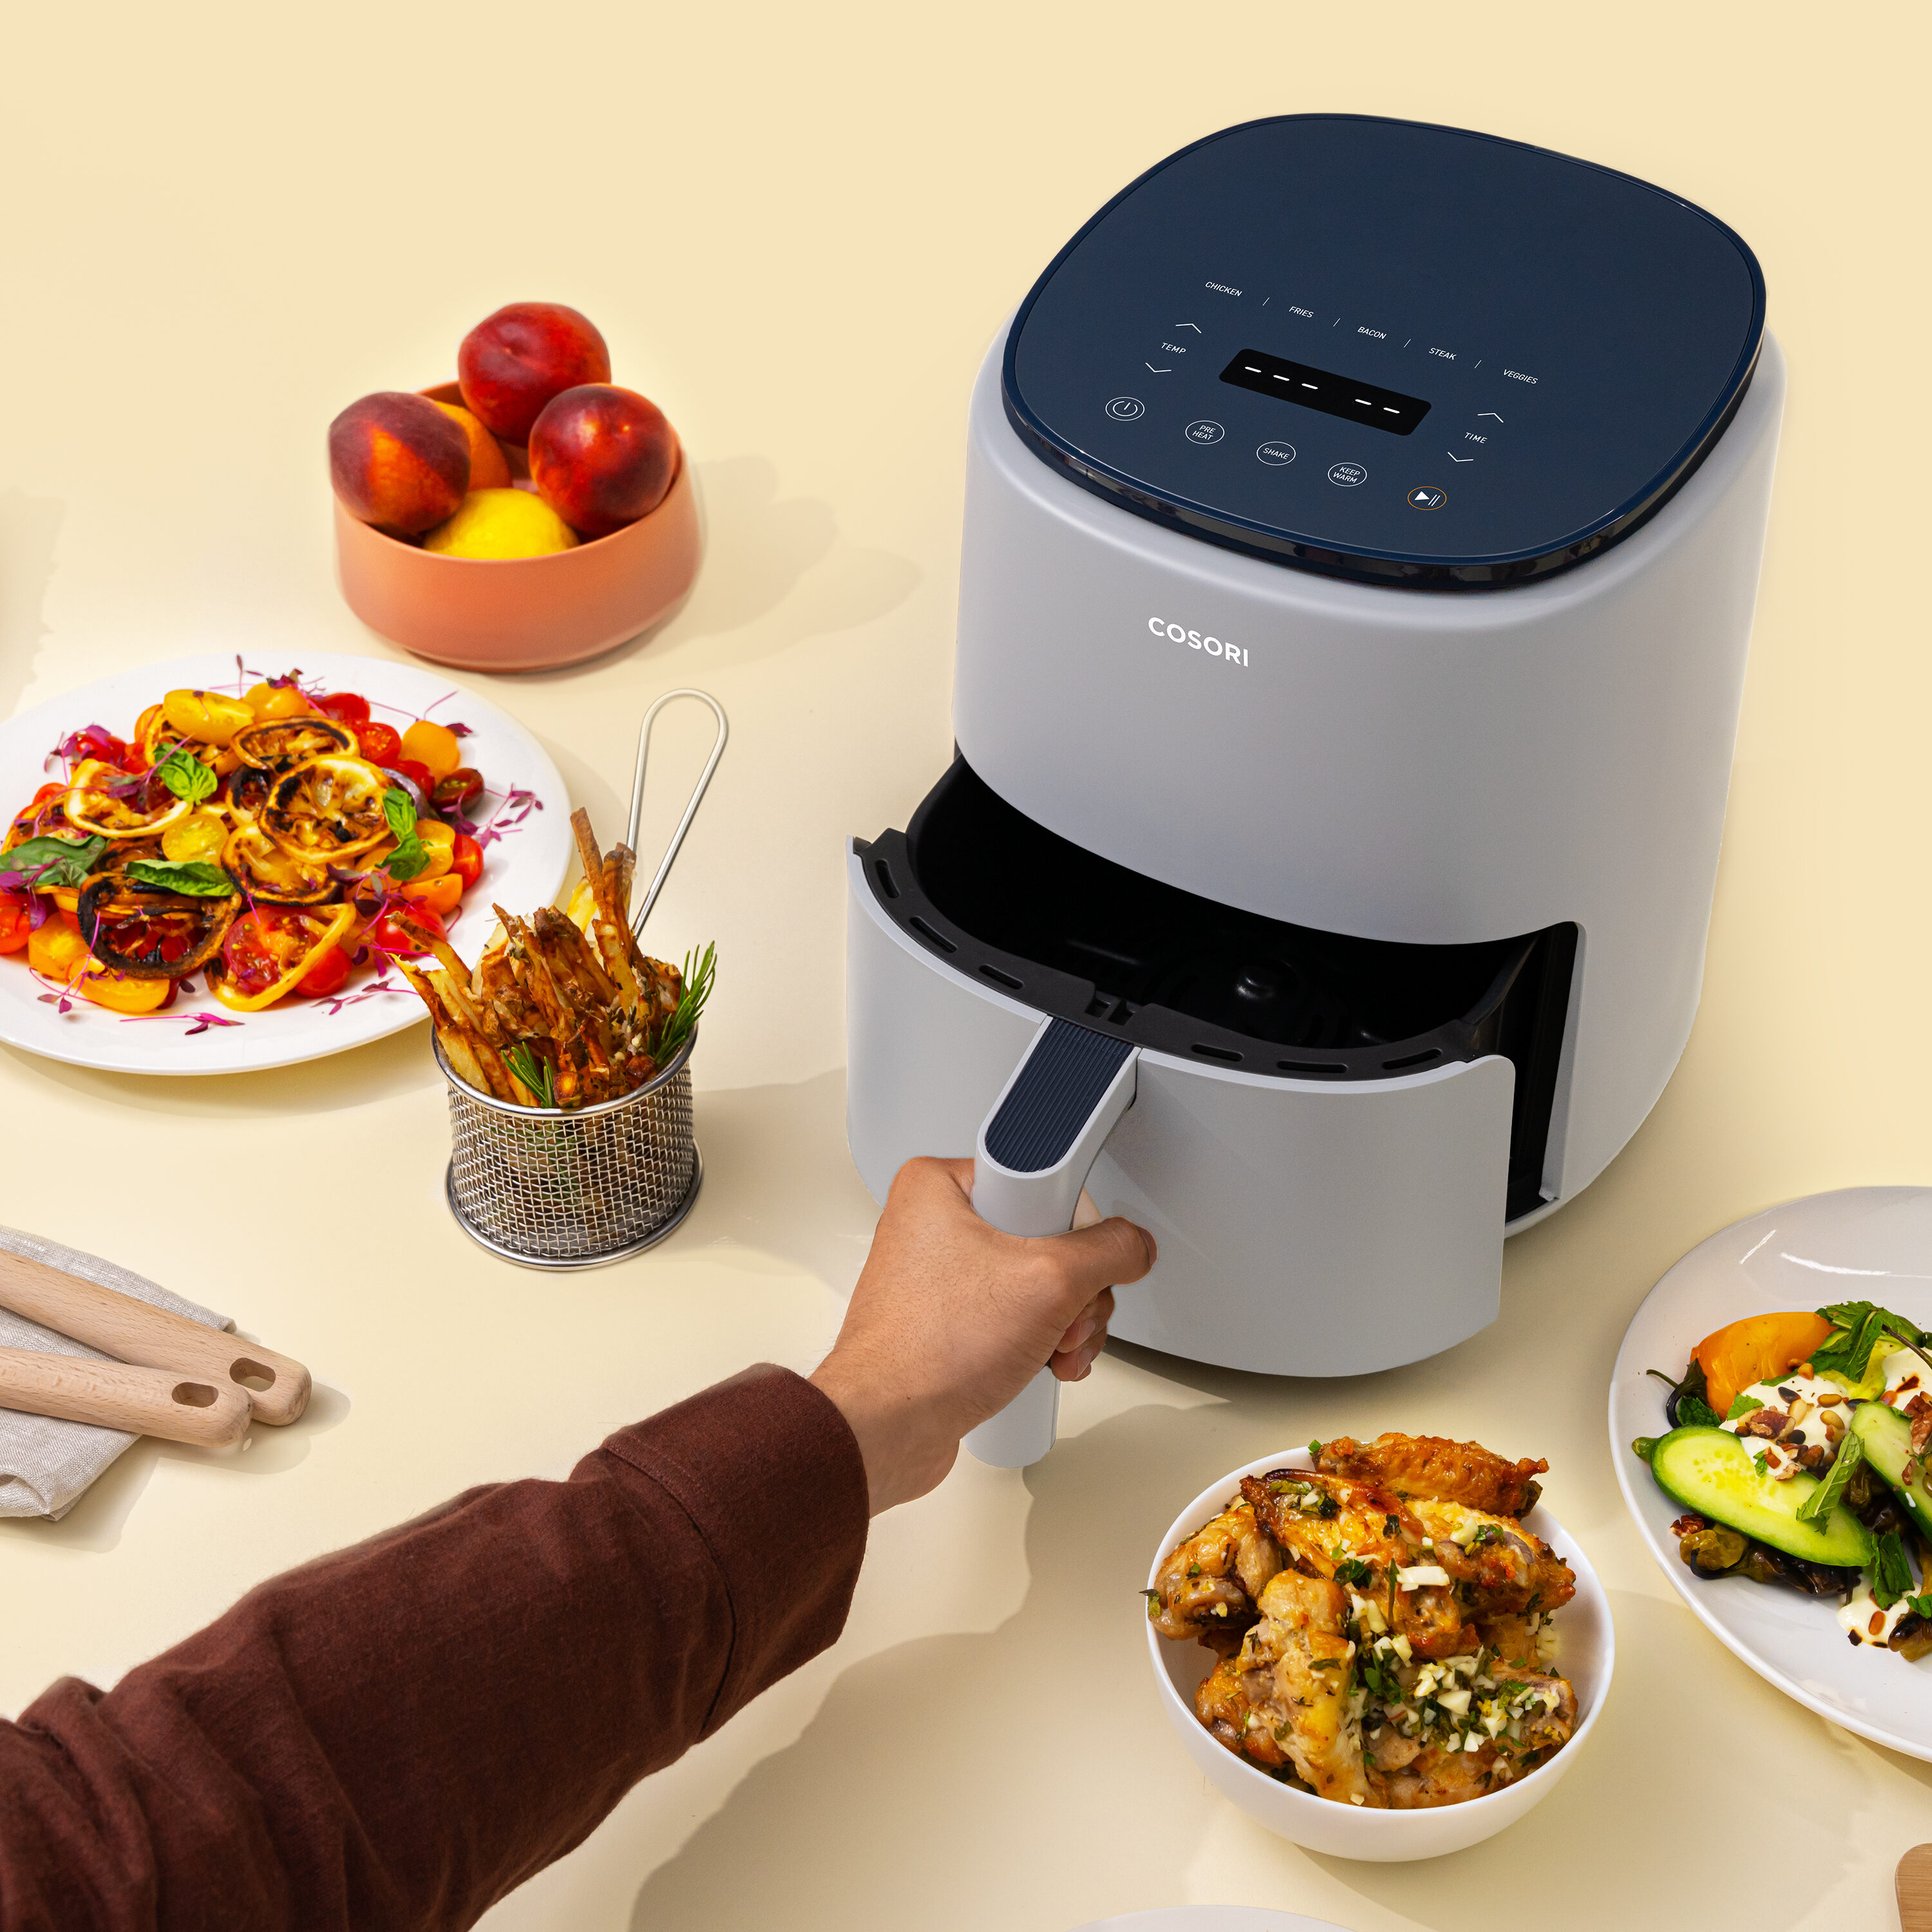 Cosori Gray Air Fryer with App Compatibility, Wi-Fi, and Voice Control -  Works with iOS, Android,  Alexa, and Google Assistant in the Air  Fryers department at